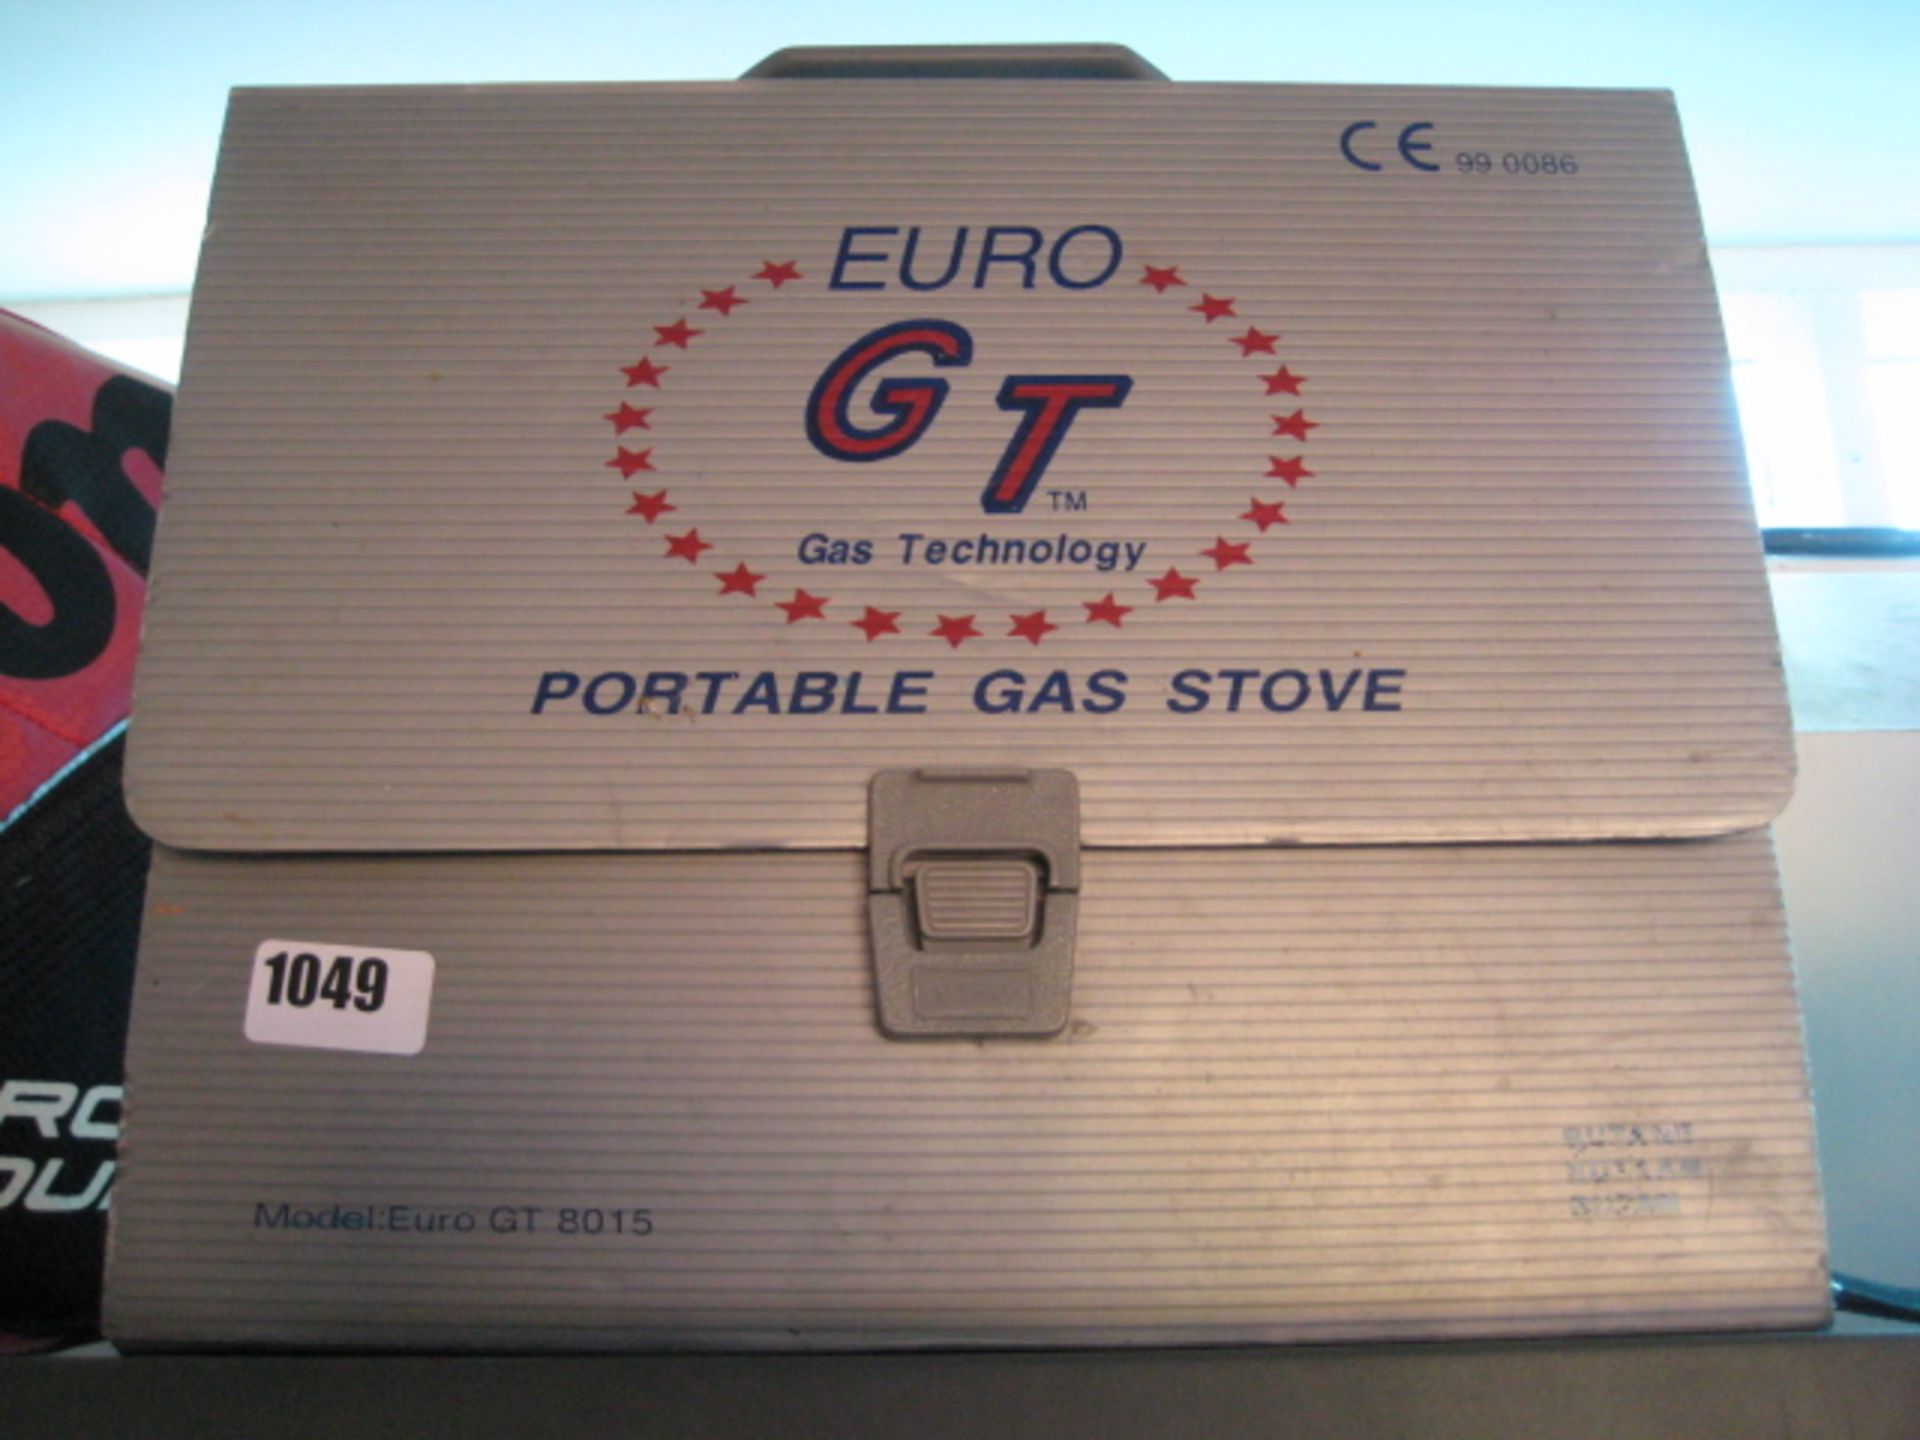 Euro GT portable gas stove in carry case